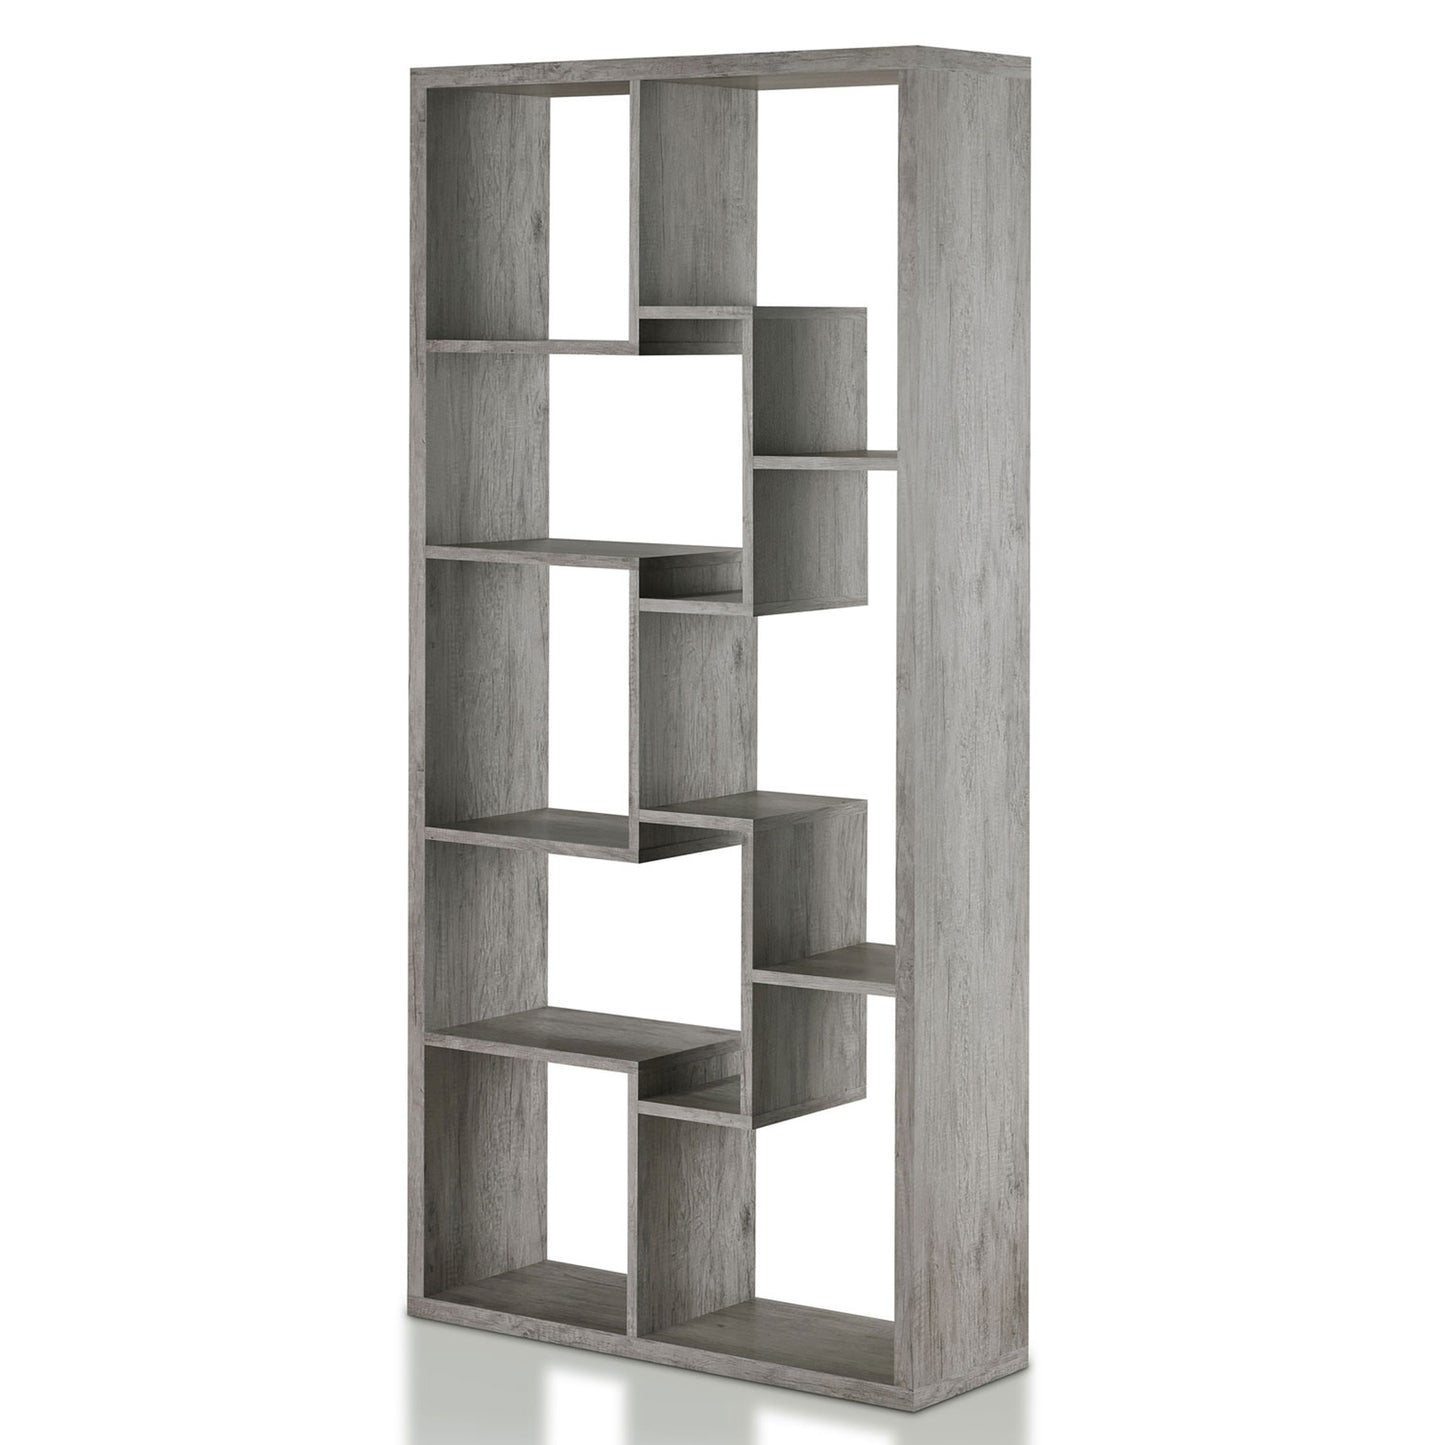 Left angled modern vintage gray oak geometric open display bookcase on a white background